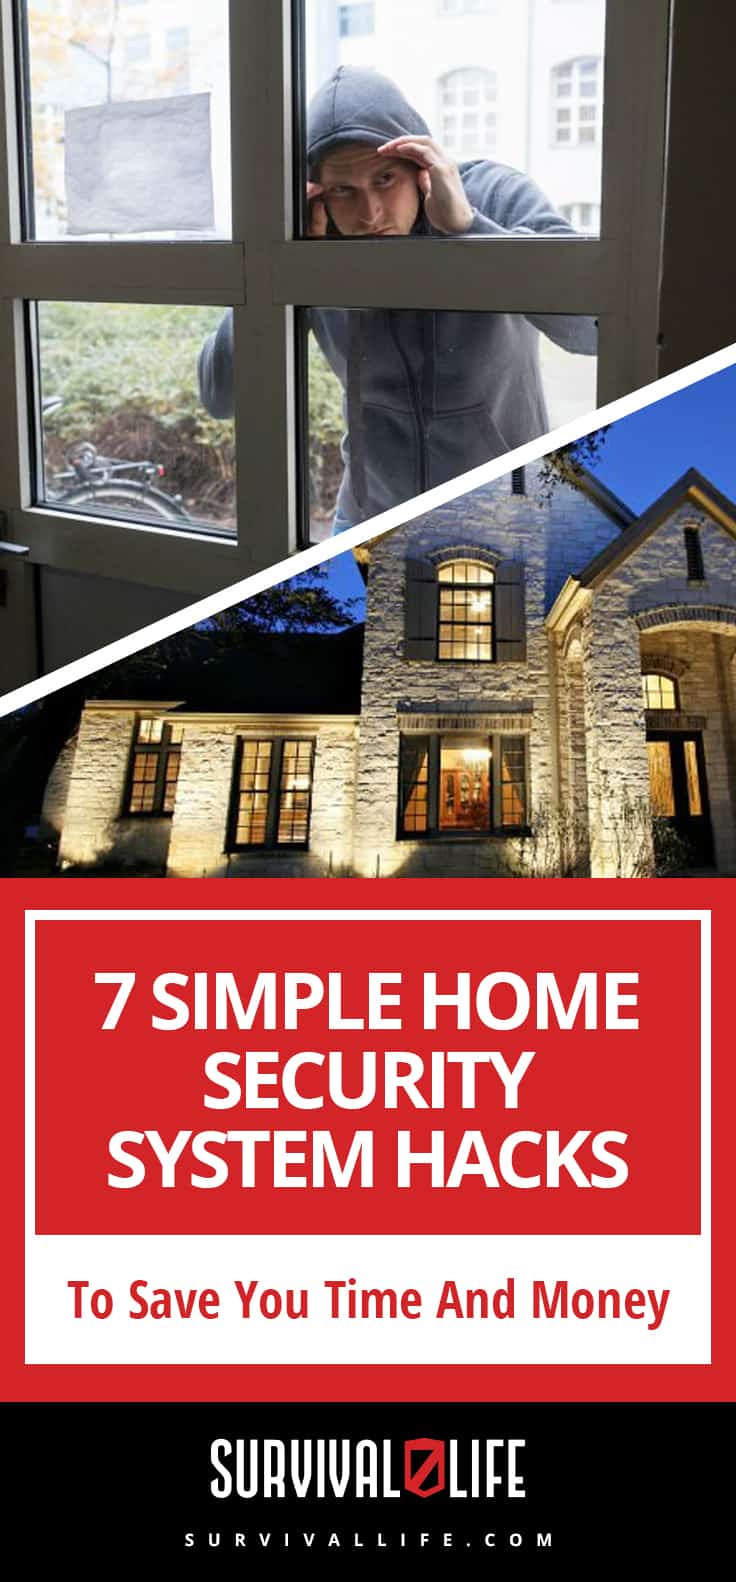 Check out 7 Simple Home Security System Hacks To Save You Time And Money at https://survivallife.com/home-security-system/